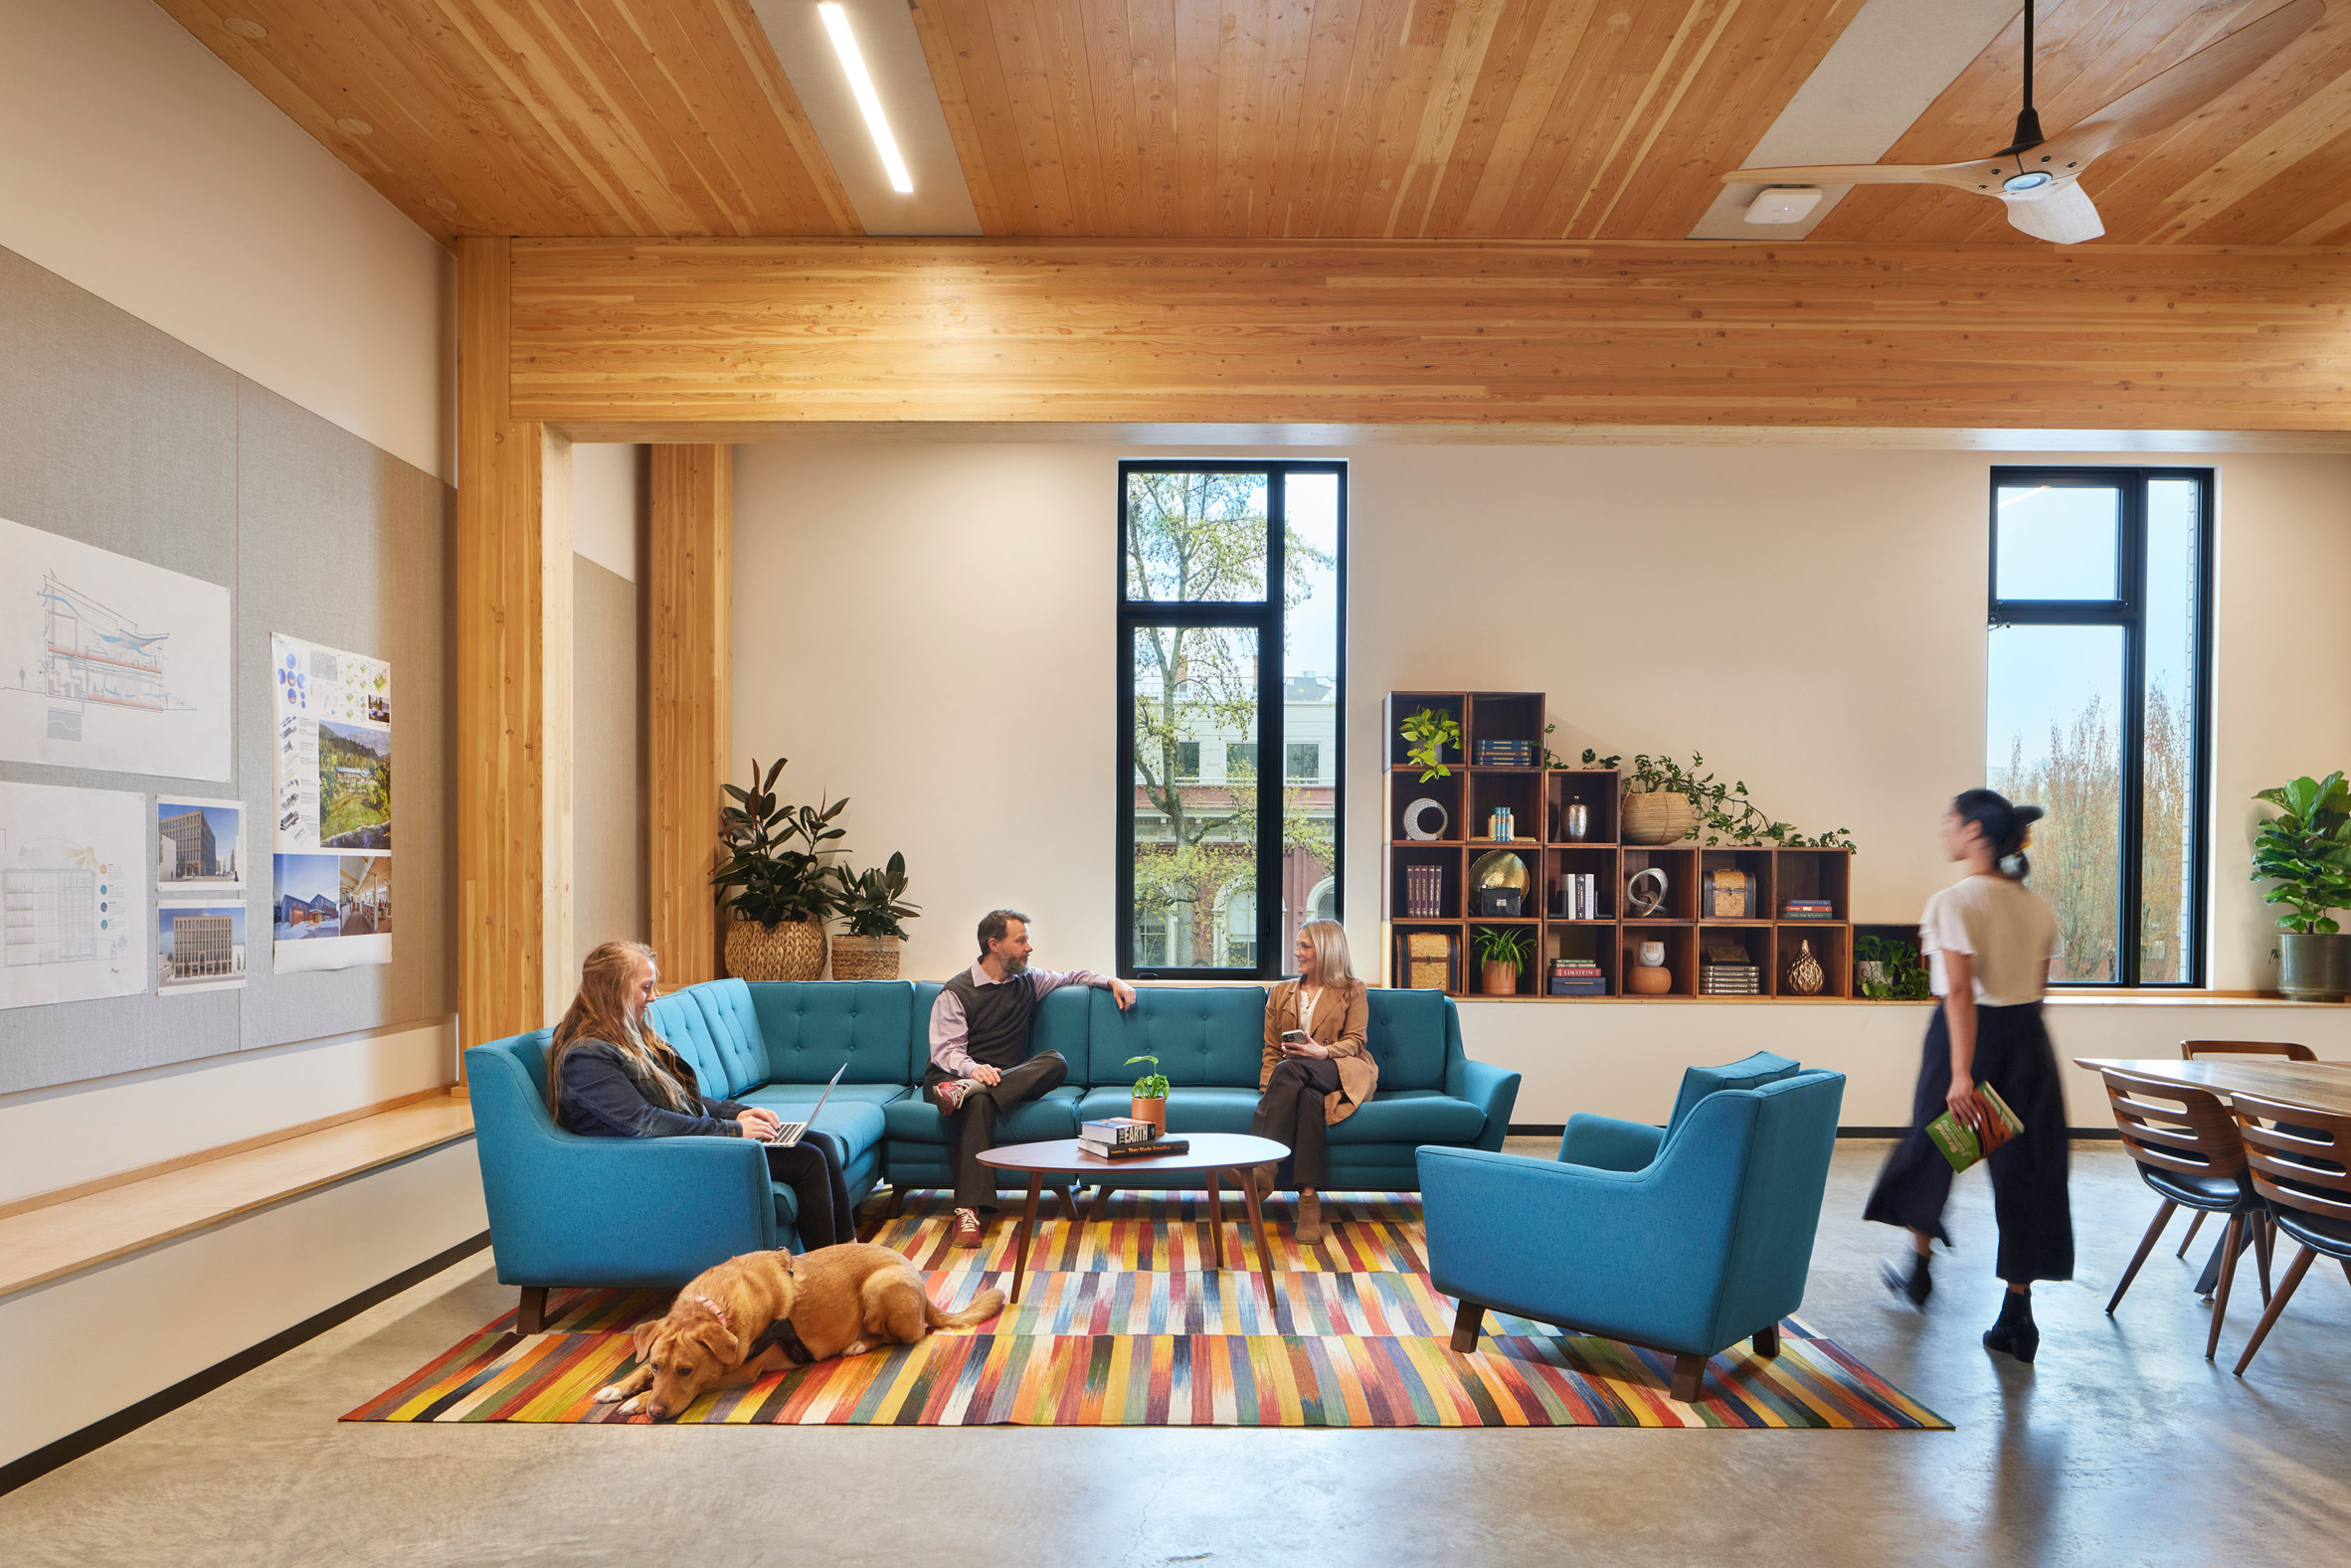 Lounge space in office mass-timber interiors